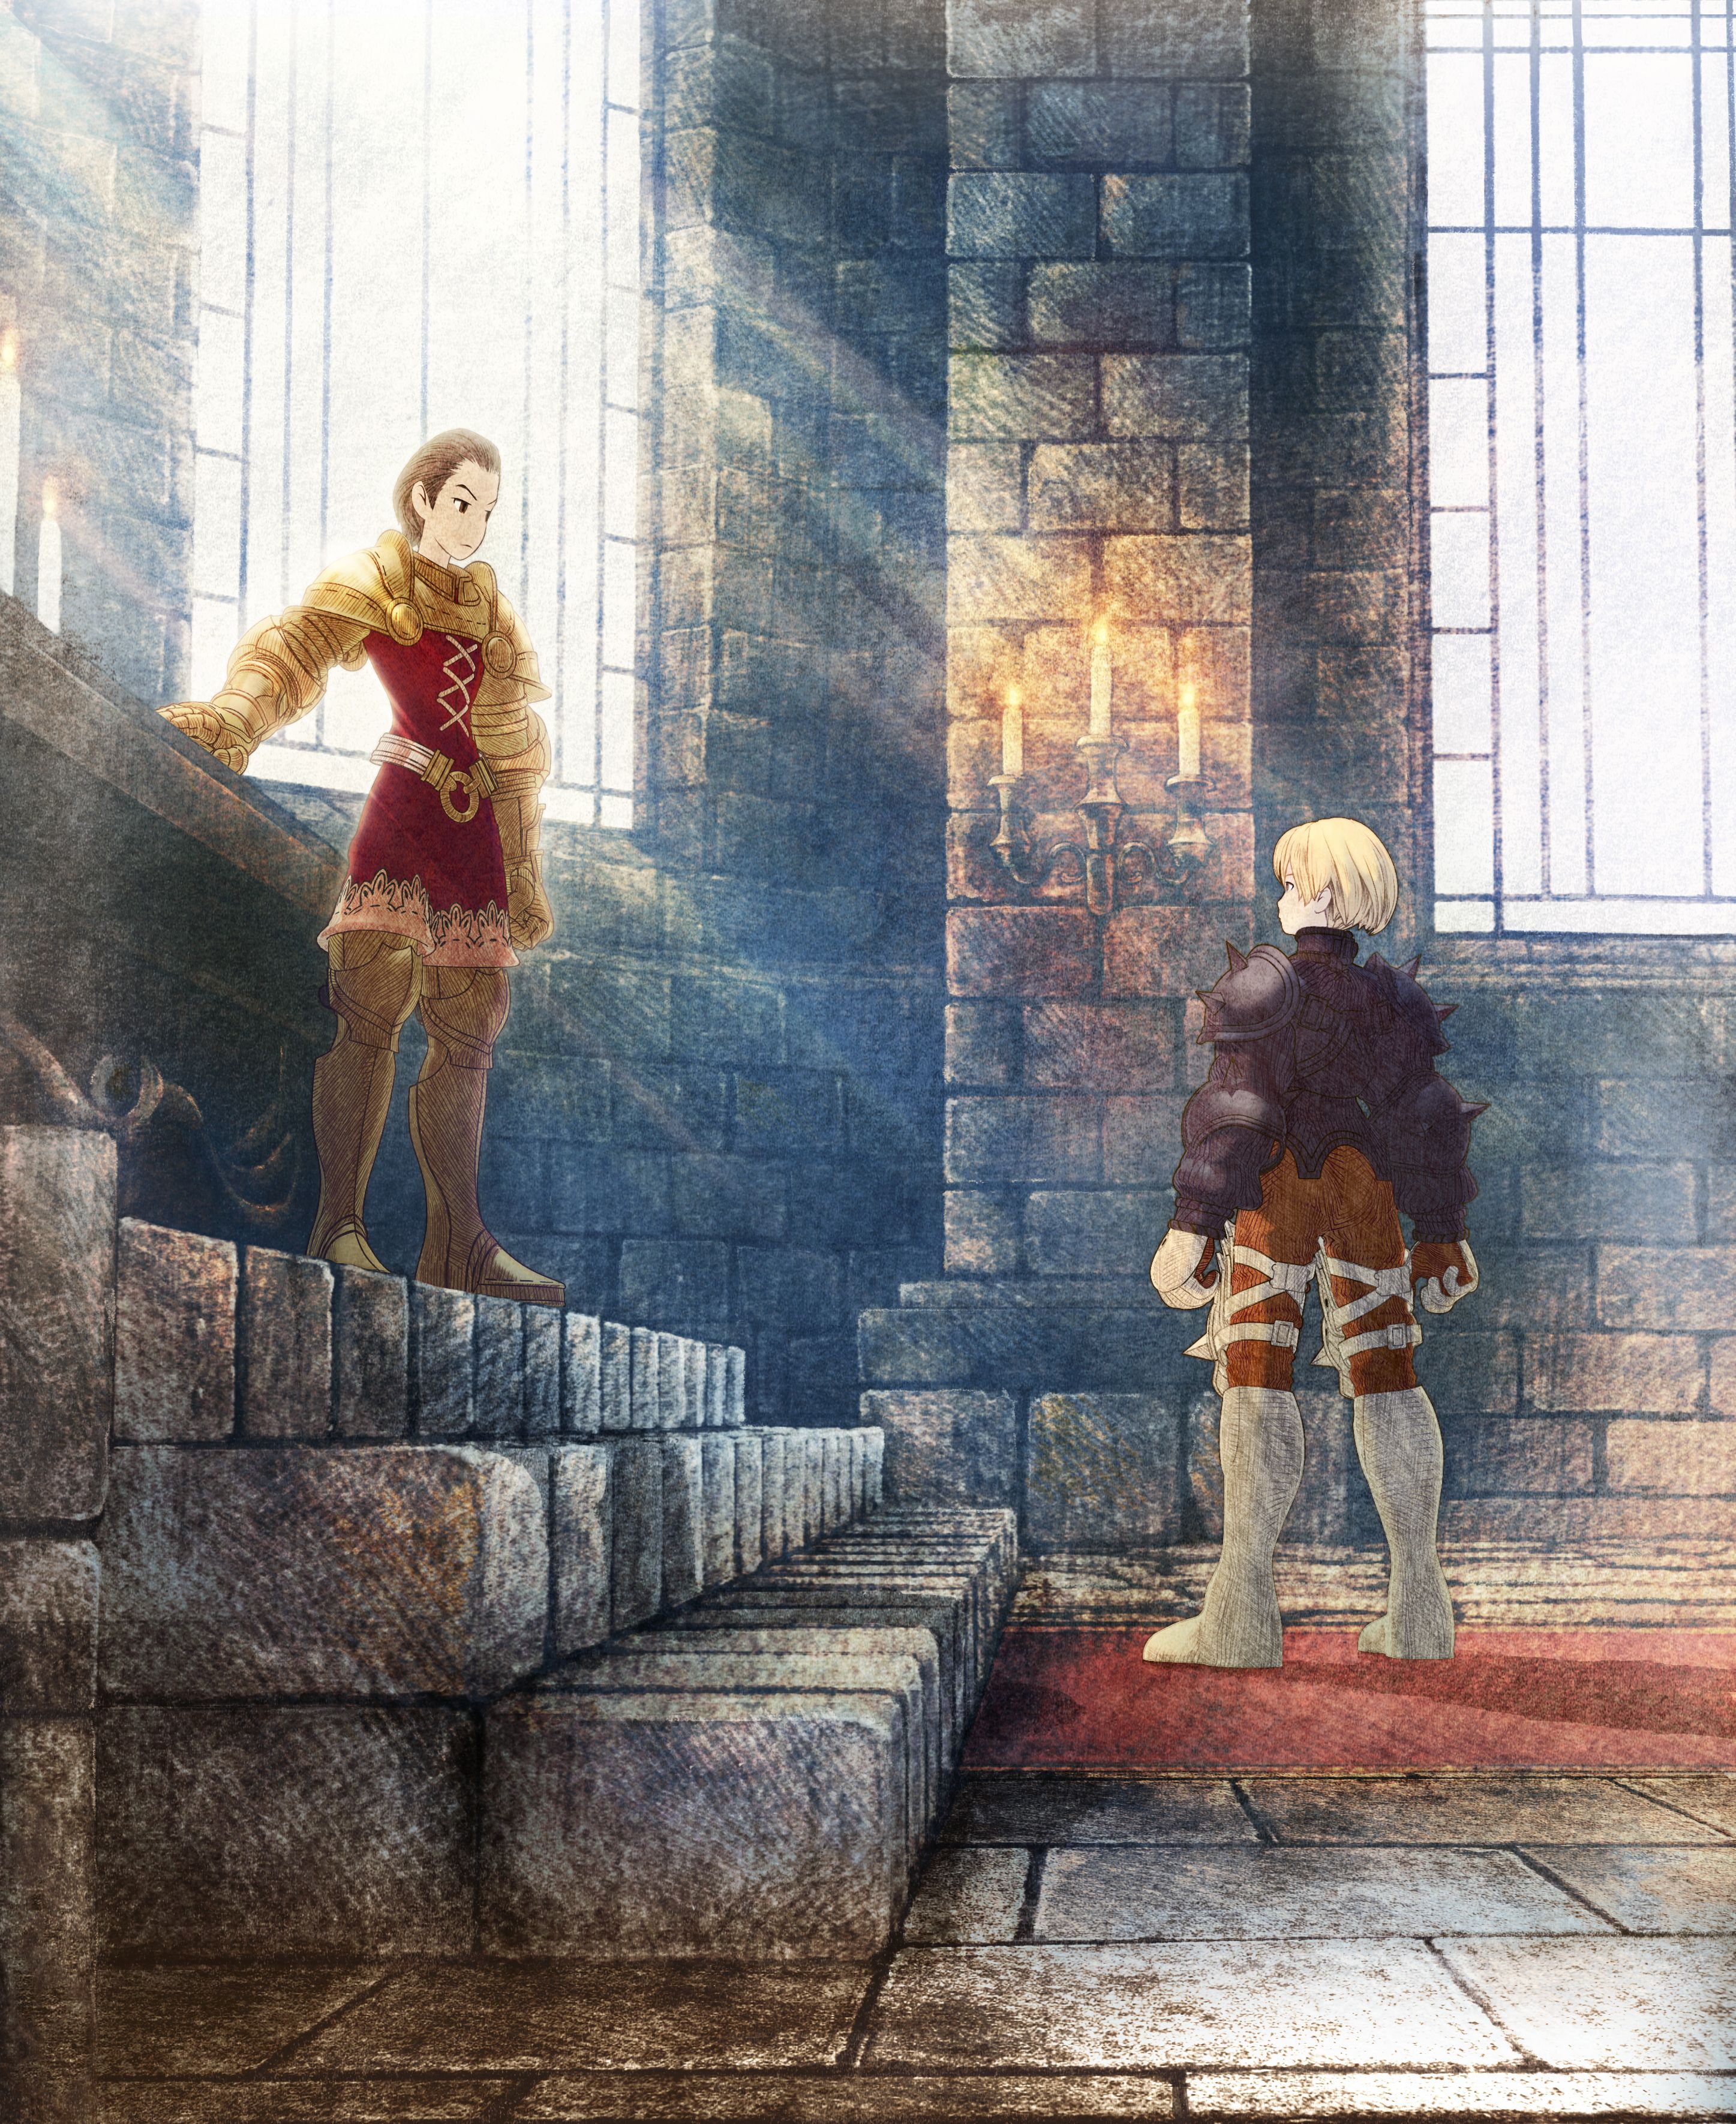 Final Fantasy Tactics The War of the Lions Artwork by